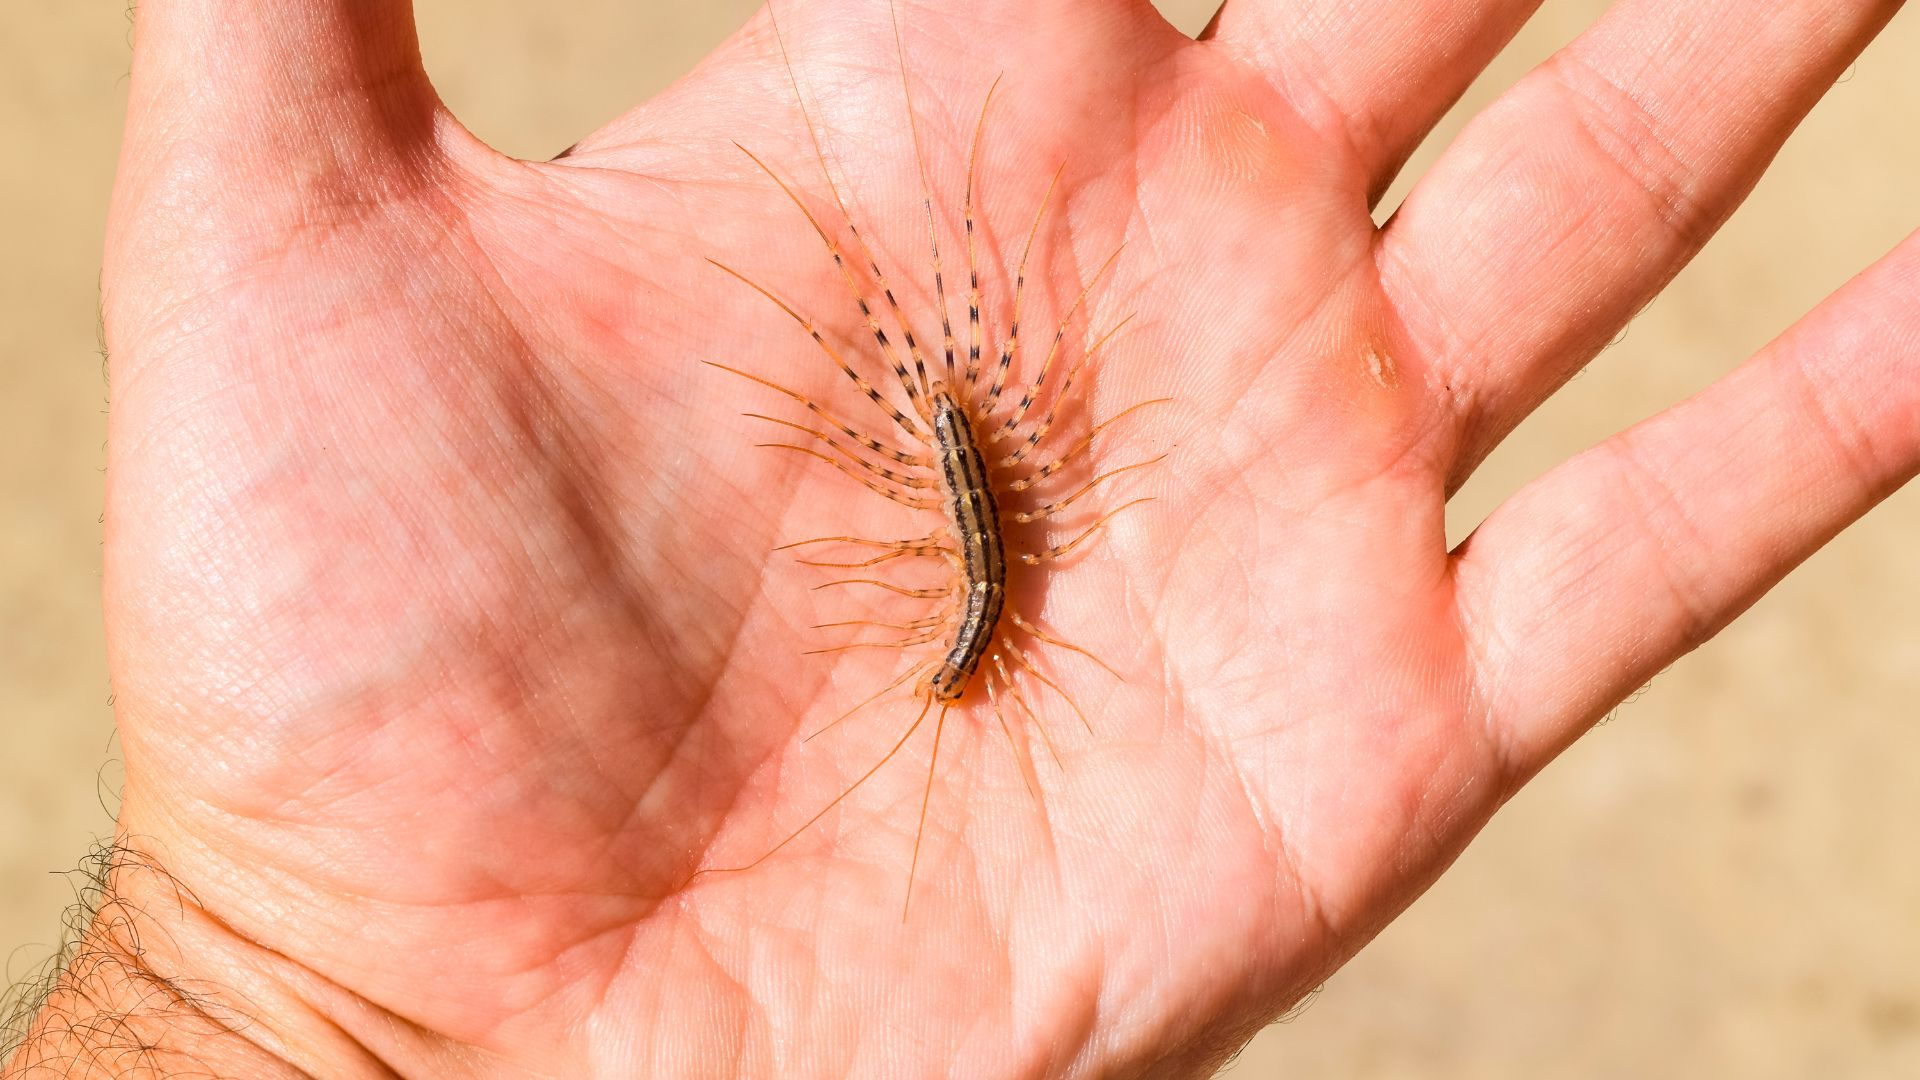 An image of a person holding a house centipede in the palm of their hand.